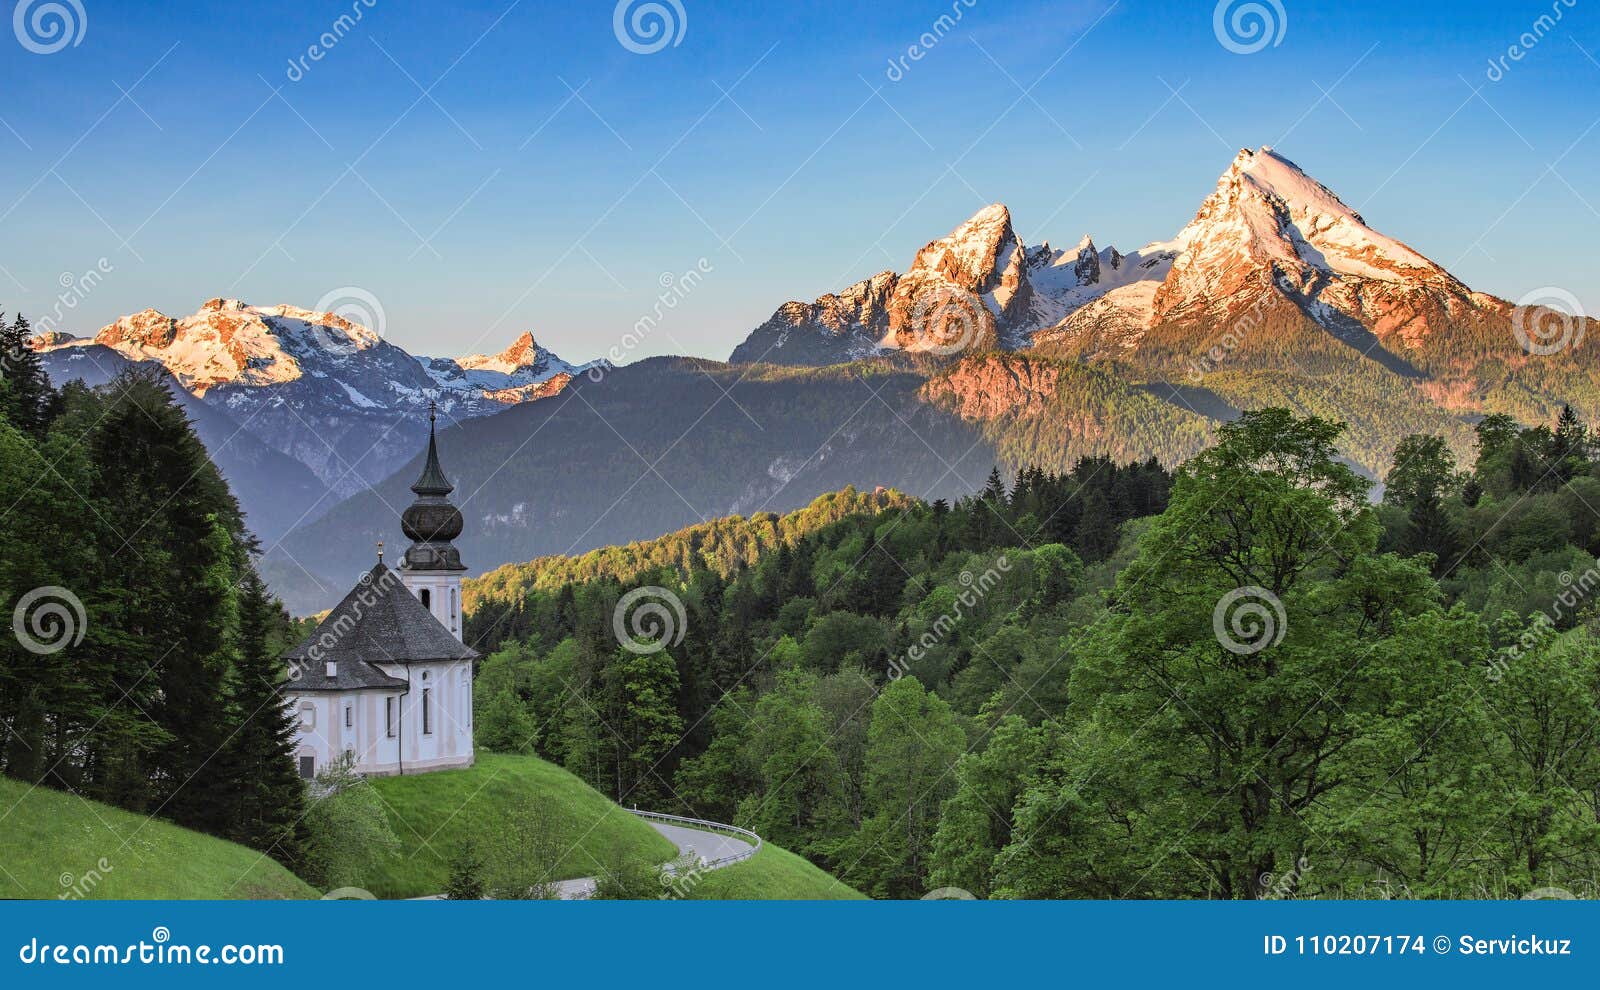 panoramic view of maria gern church with snow-capped summit of watzmann mountain